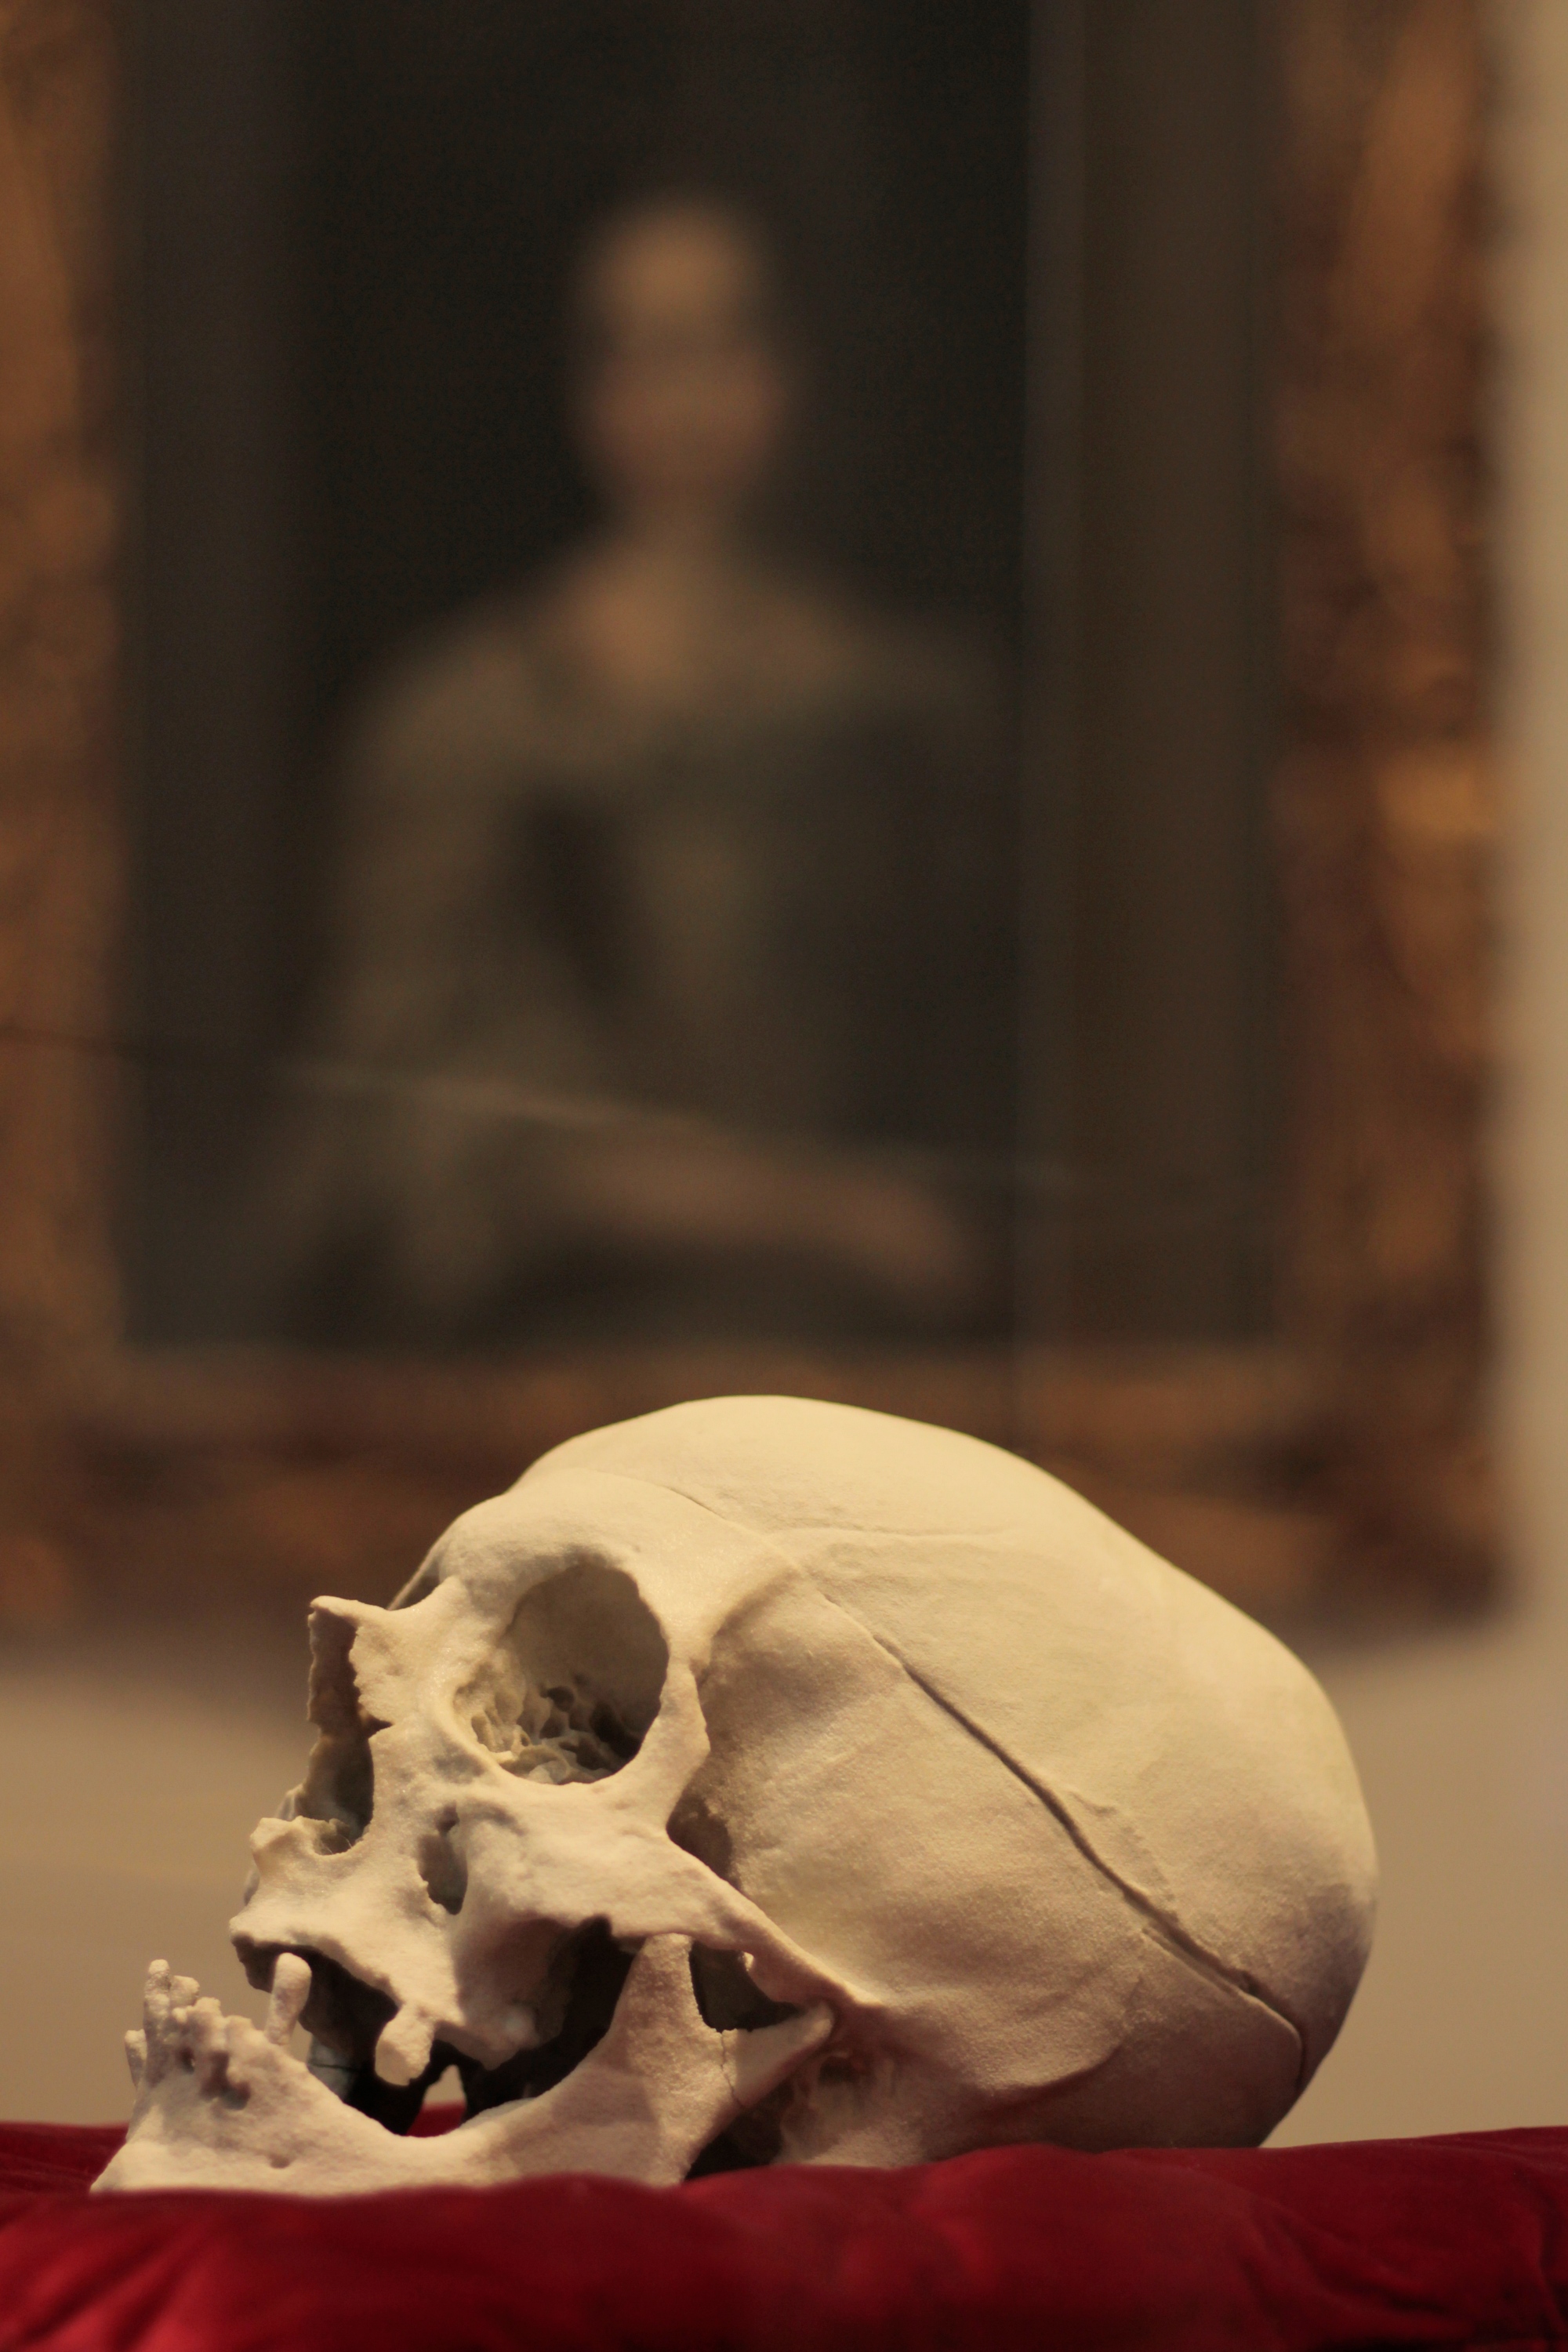 Reproduction of the skull of Gian Gastone